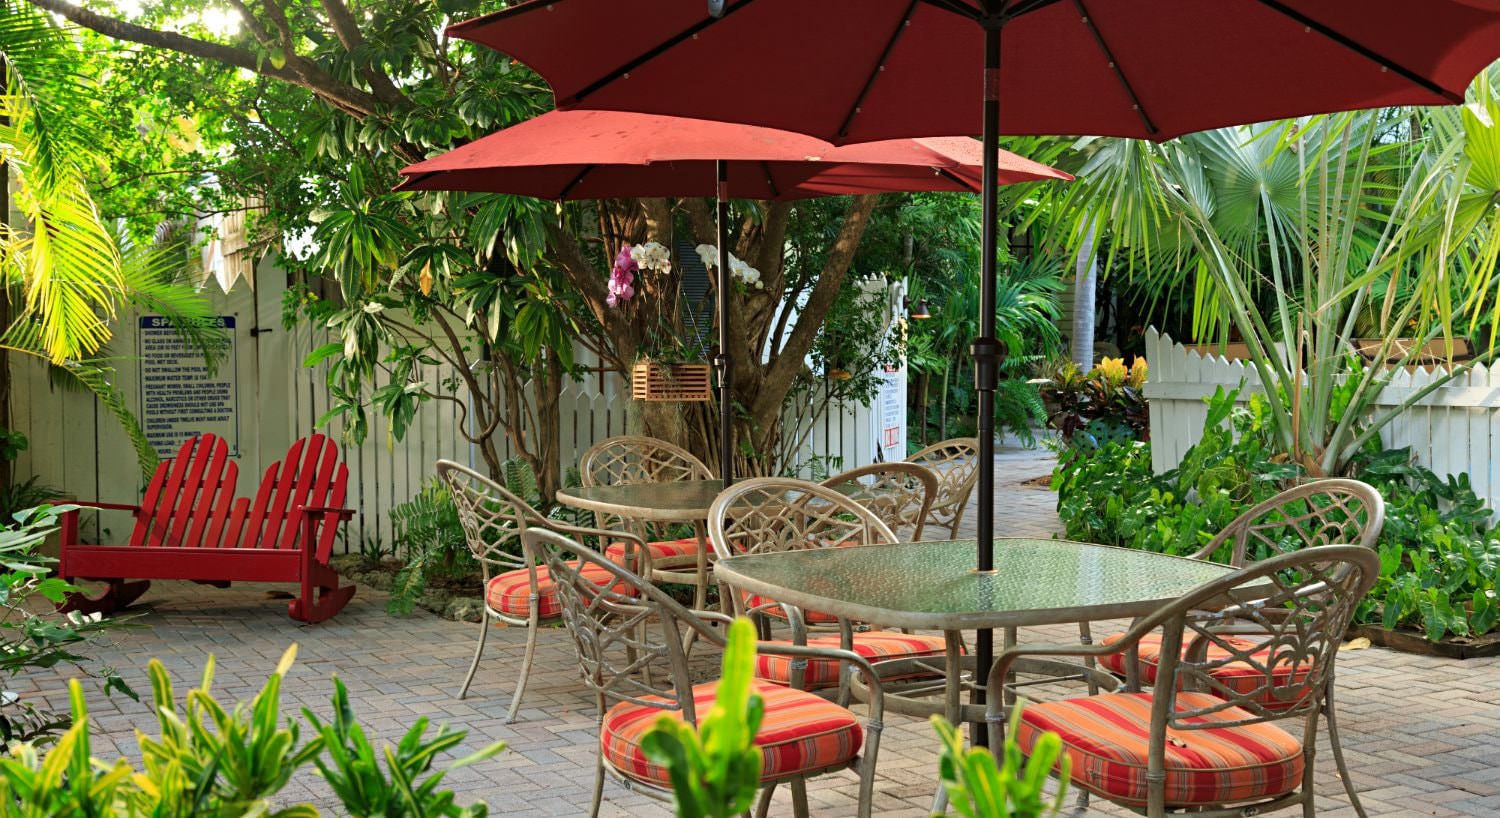 Patio area with square tables and umbrellas with red cushioned chairs surrounded by dense greenery and red wooden slated seat